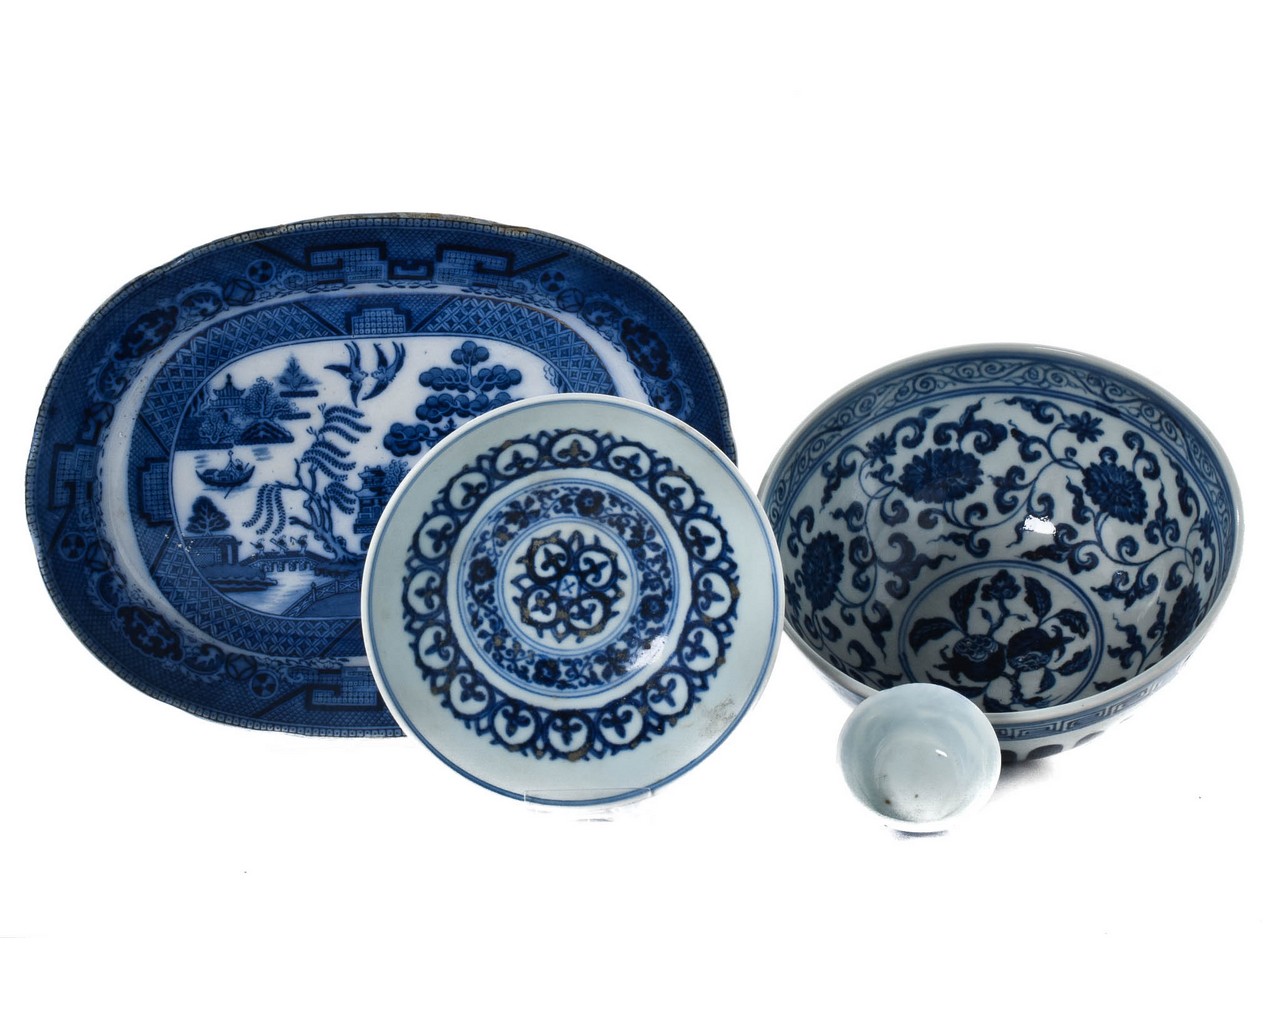 FOUR CHINESE BLUE AND WHITE PORCELAIN VESSELS